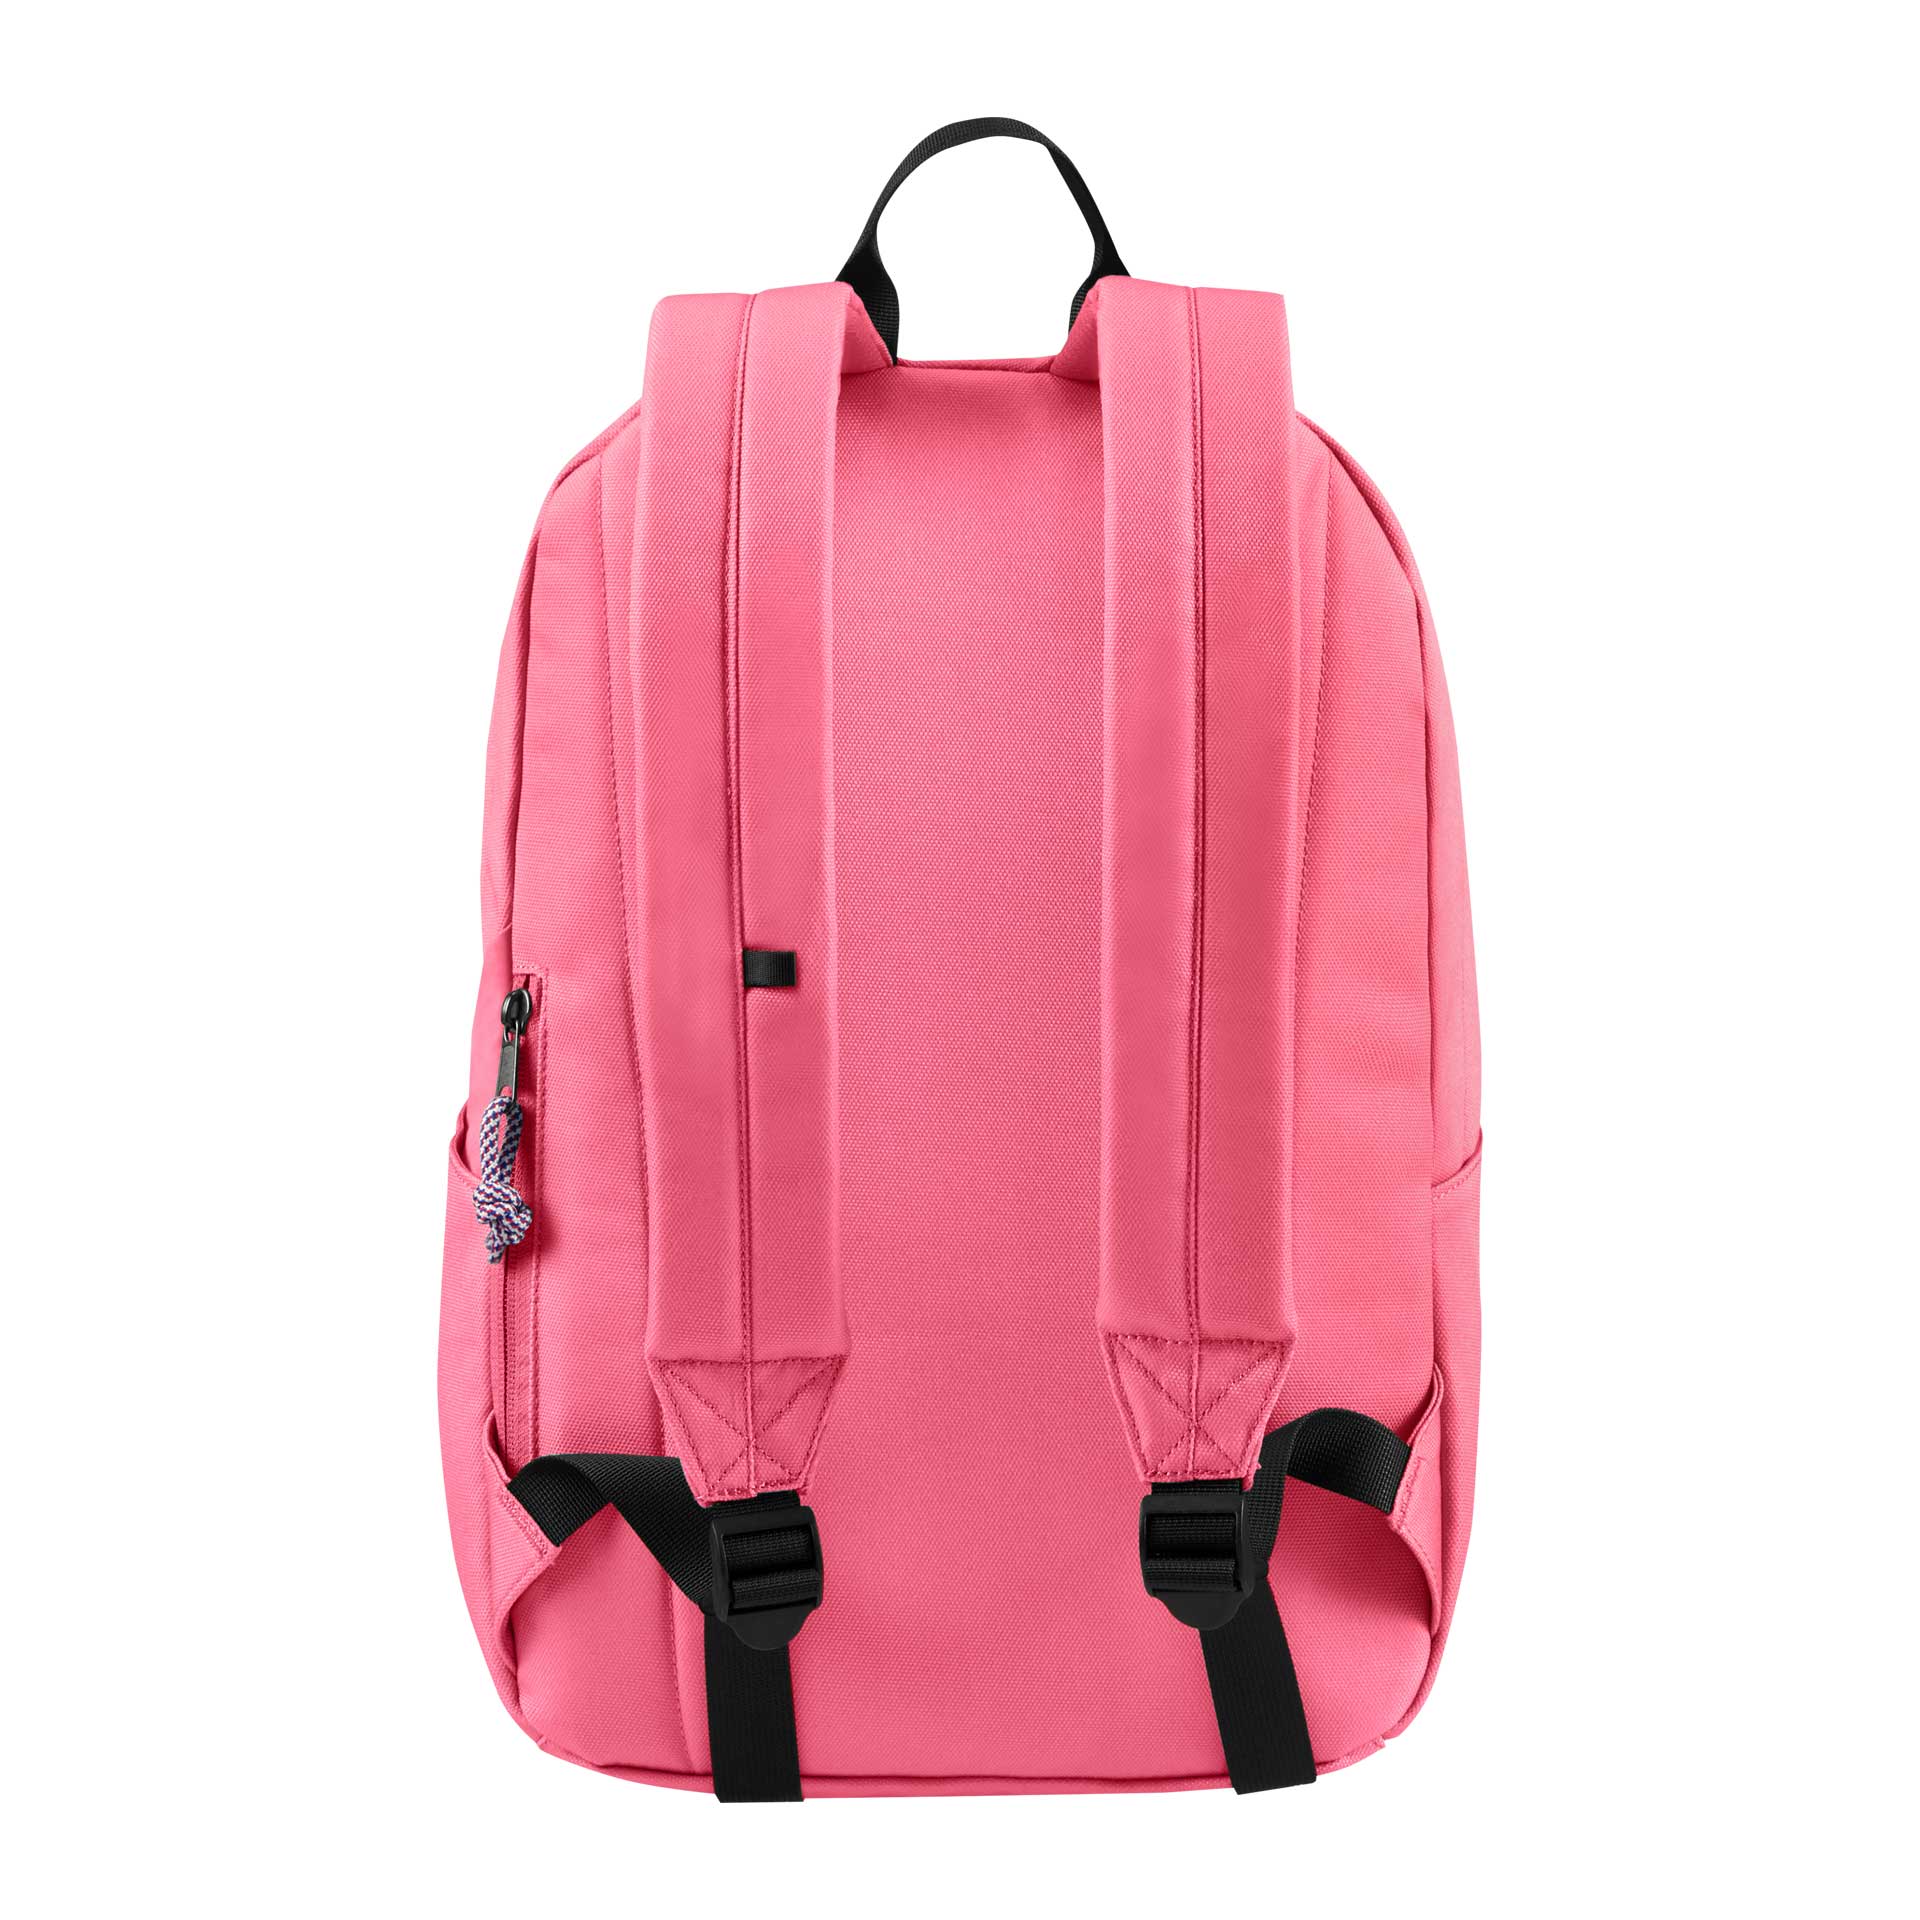 American Tourister UpBeat Rucksack sun kissed coral